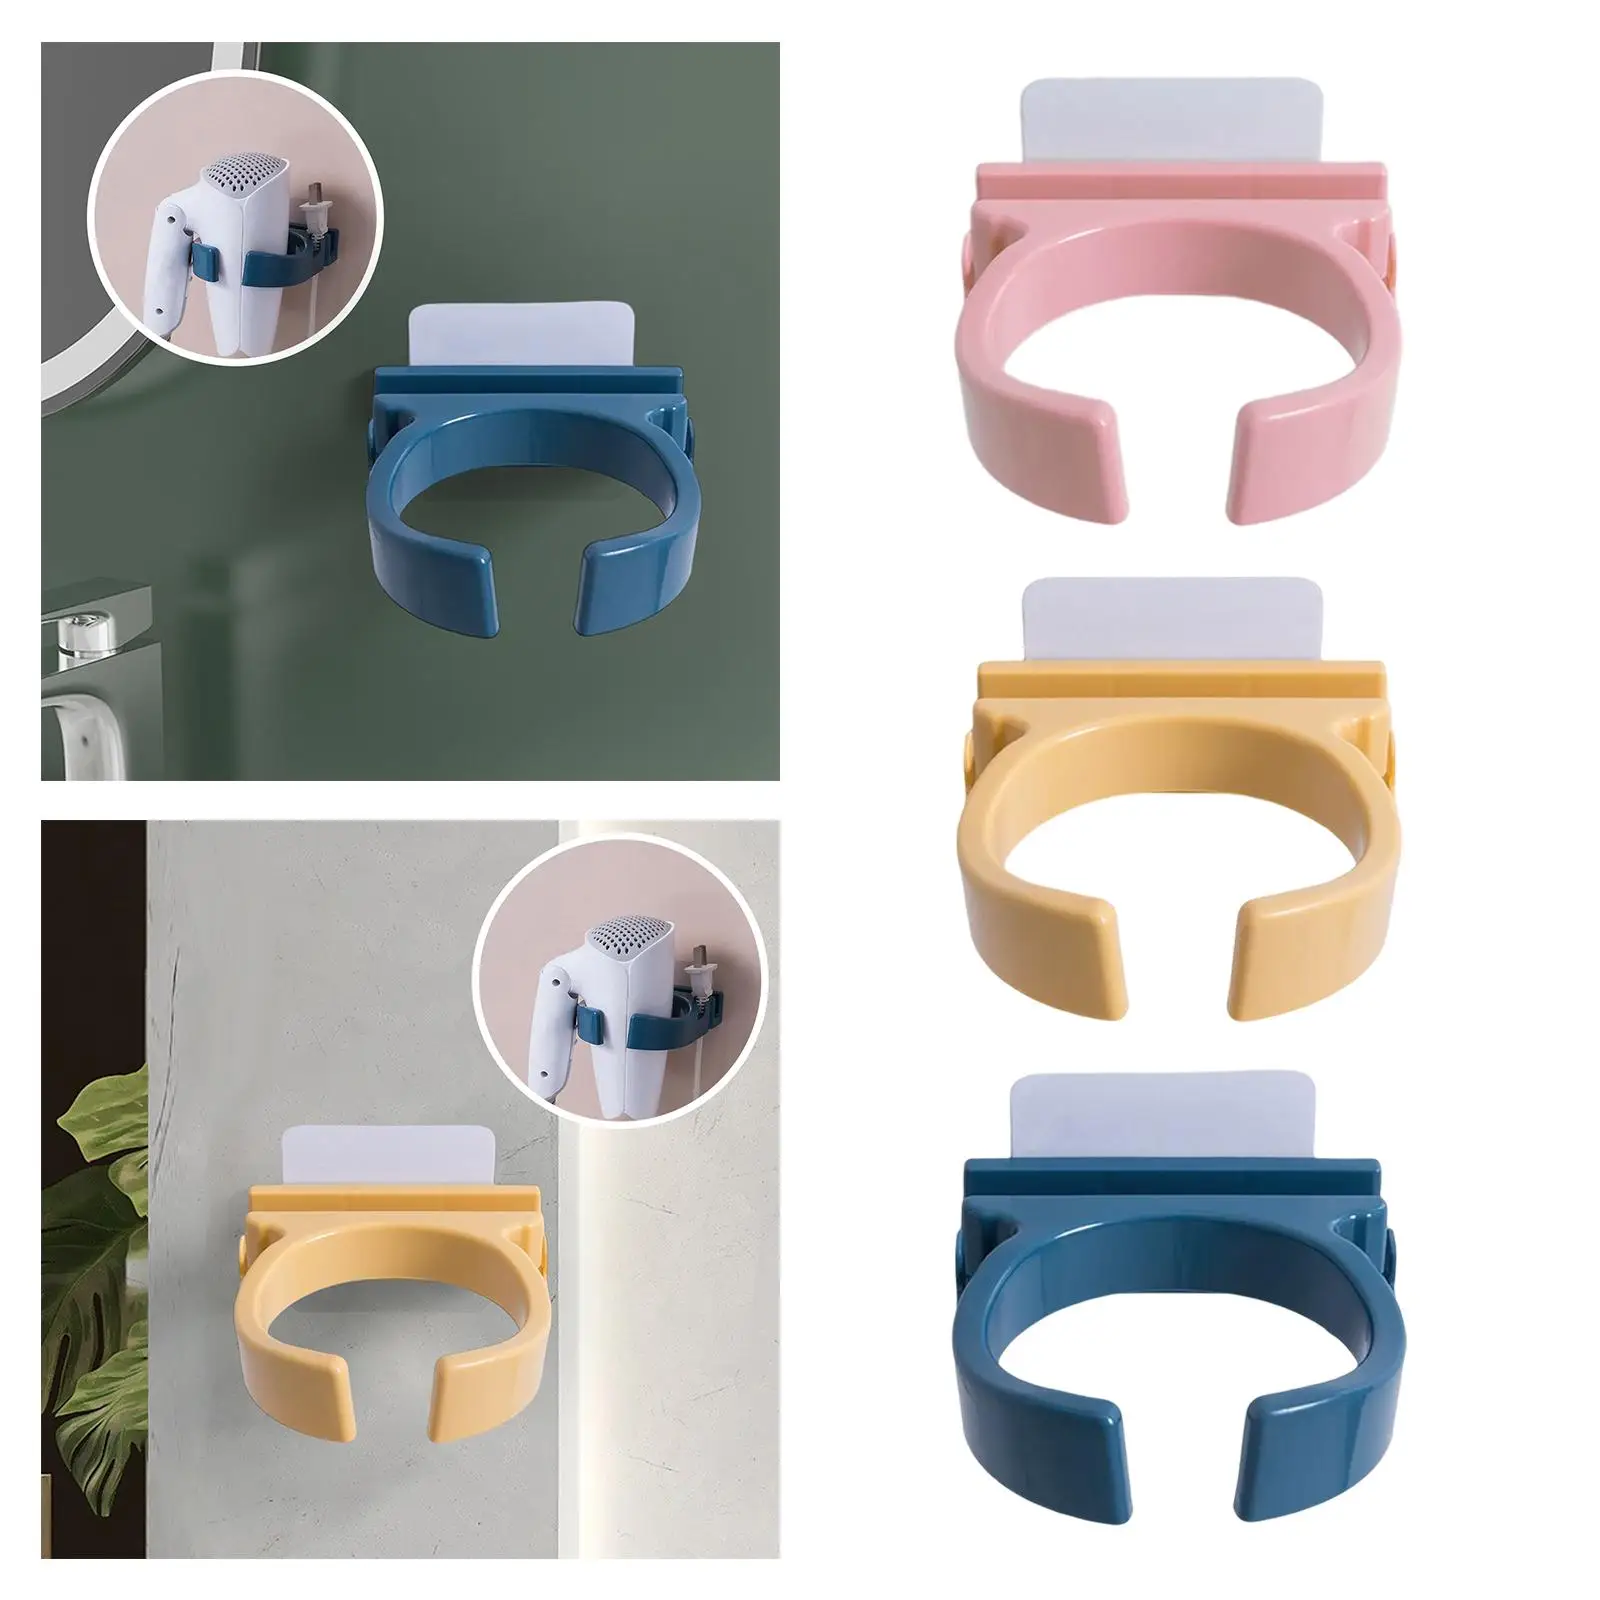 Punch Hair Dryer Holder Adhesive ABS Wear Resistant Wall Mounted Durable Storage Shelf Rack for Home Hotel Washroom Bedroom